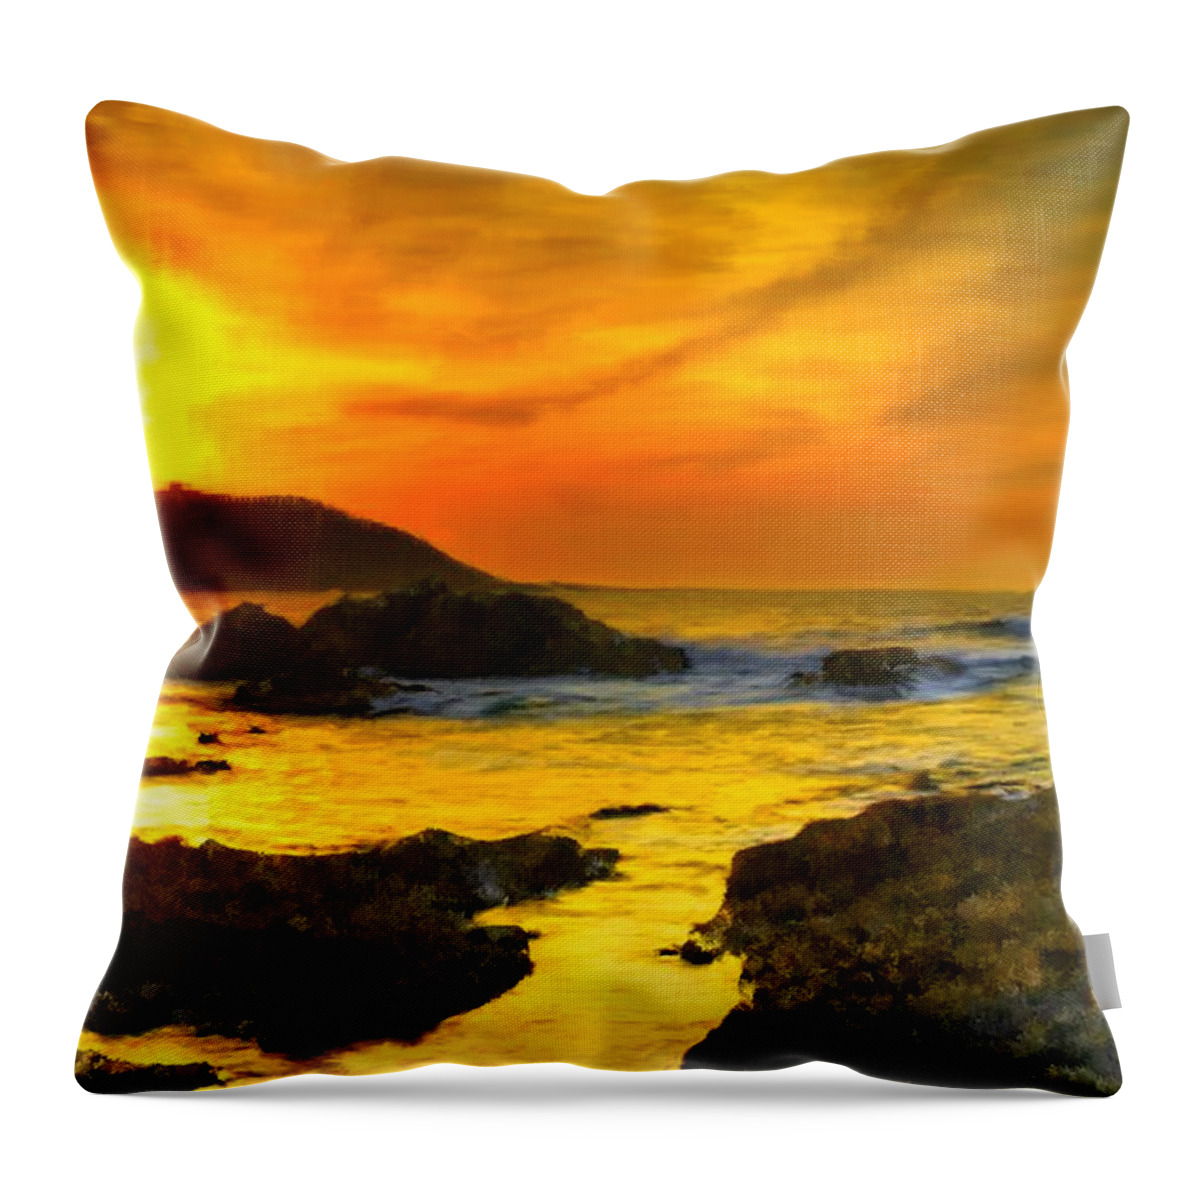 Golden Throw Pillow featuring the painting Golden Sky by Bruce Nutting